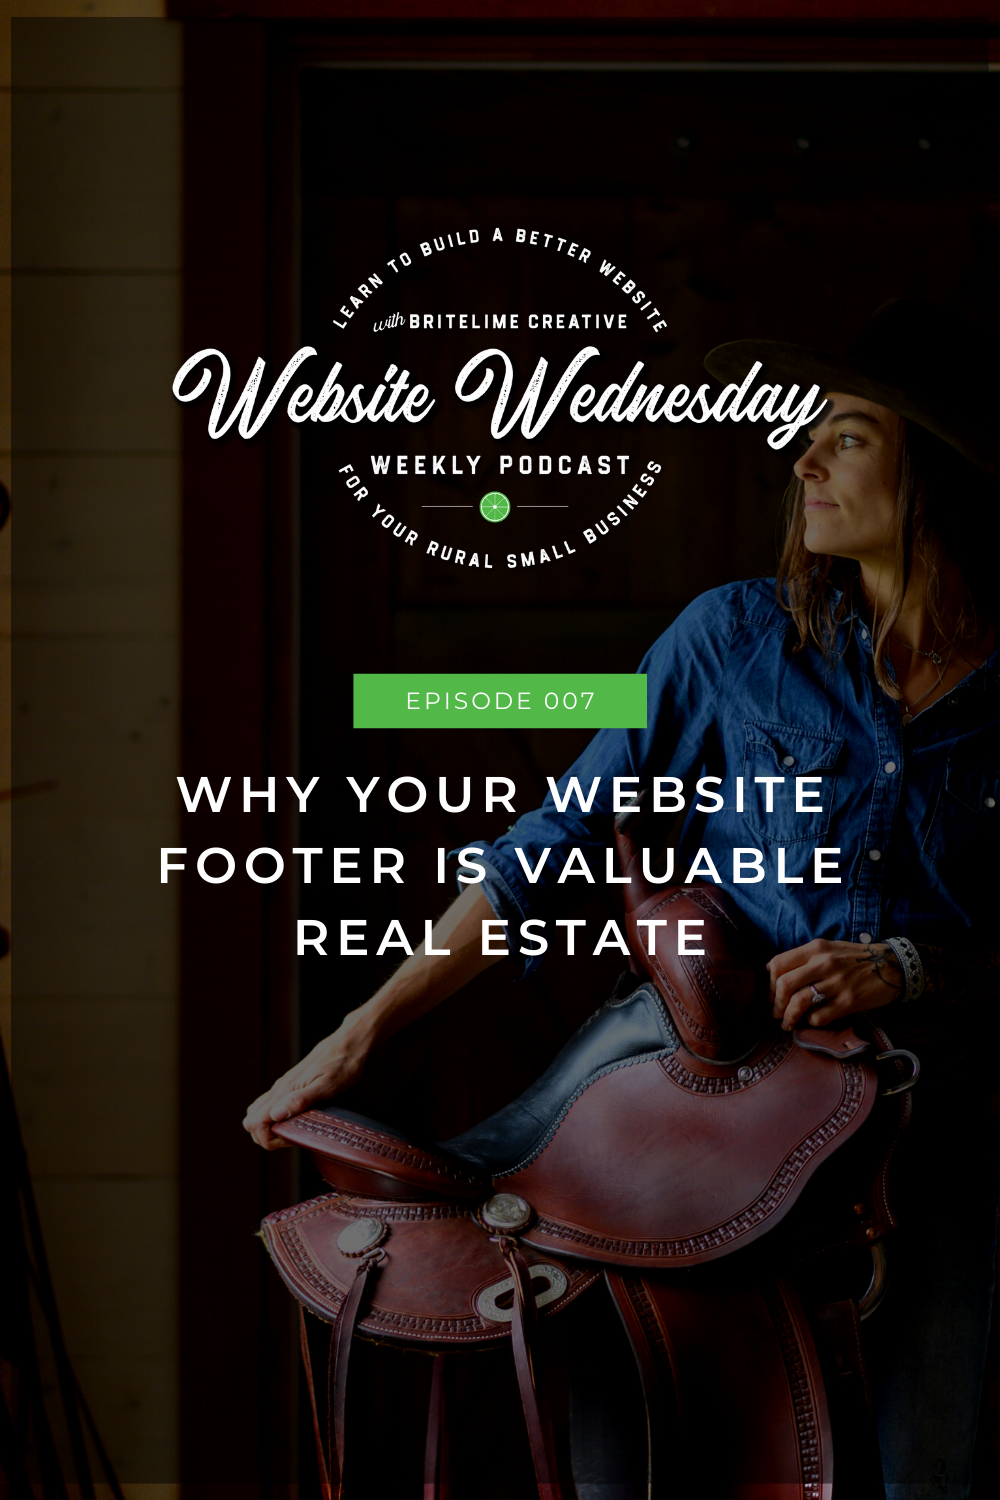 Episode 007 Podcast Image of a woman holding a western saddle with the text overlayed that reads: Why Your Website Footer is Valuable Real Estate